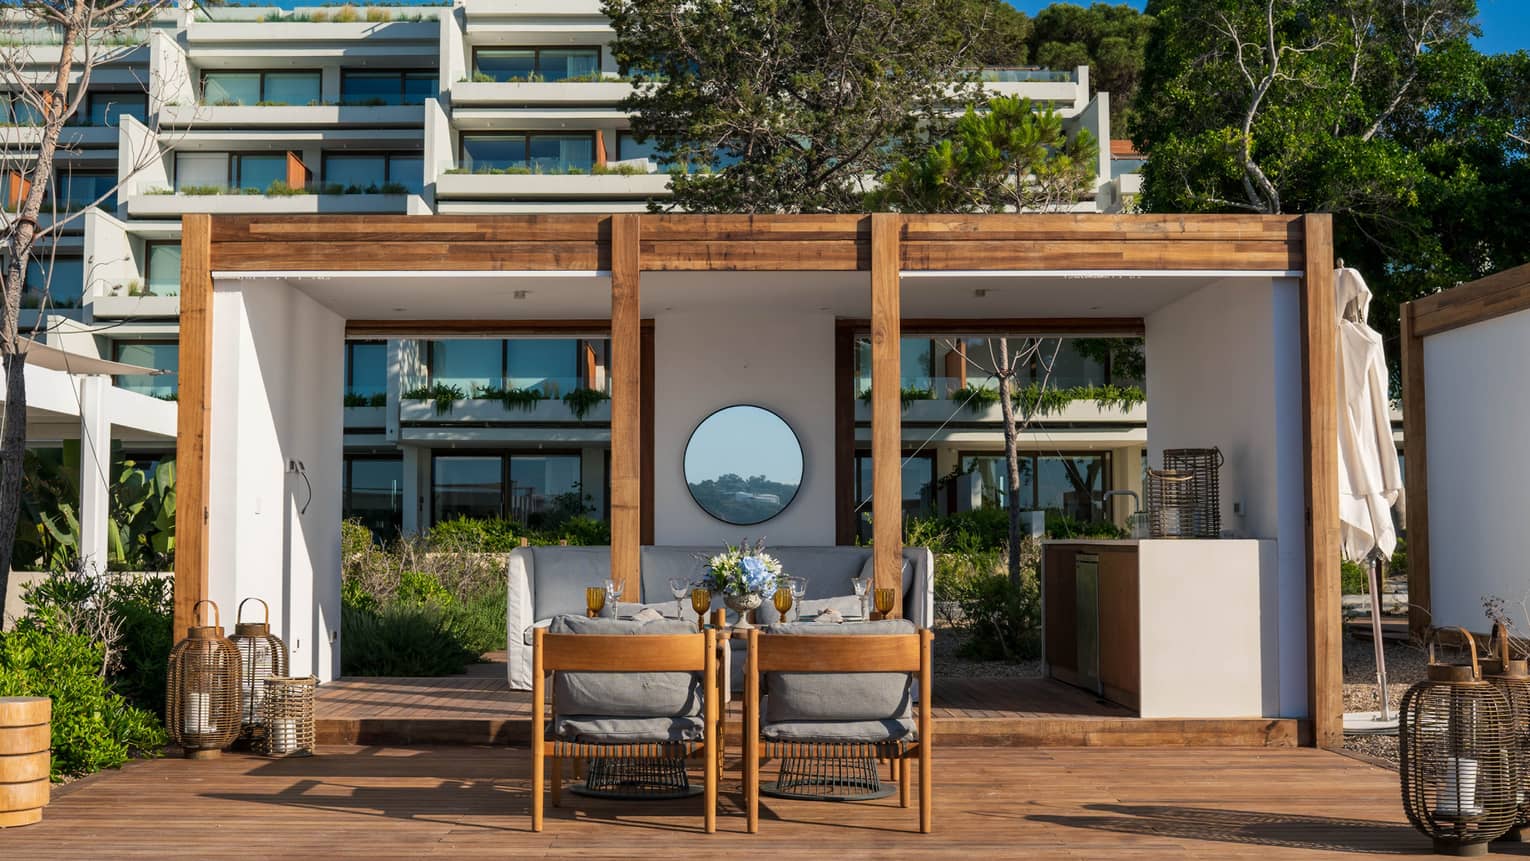 A pristine white cabana with wood accents frames a patio dining area in front of hotel balconies laden with greenery. 